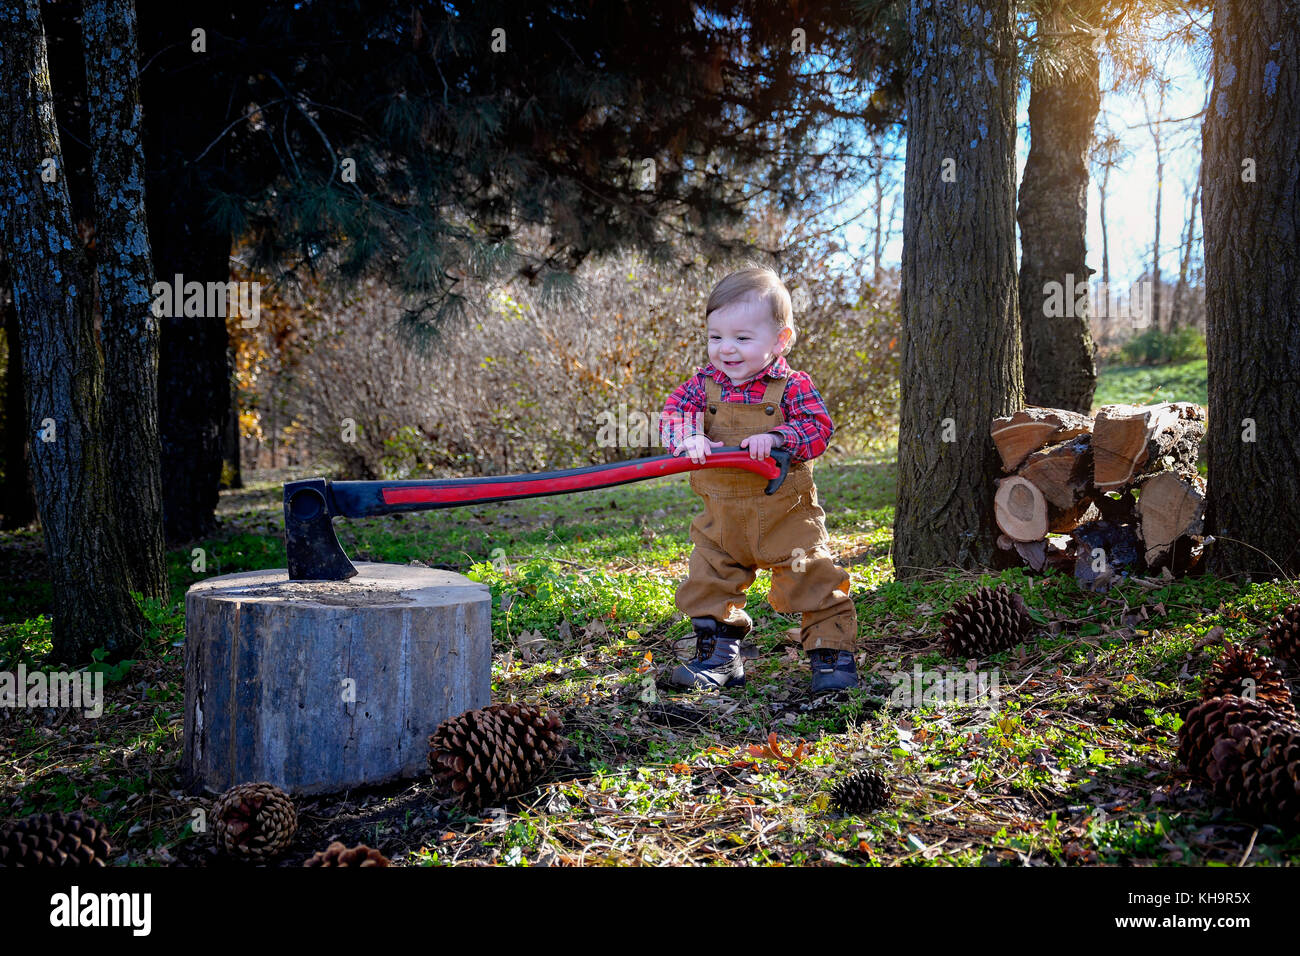 Baby boy pretending to be lumberjack wearing boots and overalls using ax pretending to chop wood pinecones and rural country setting Stock Photo